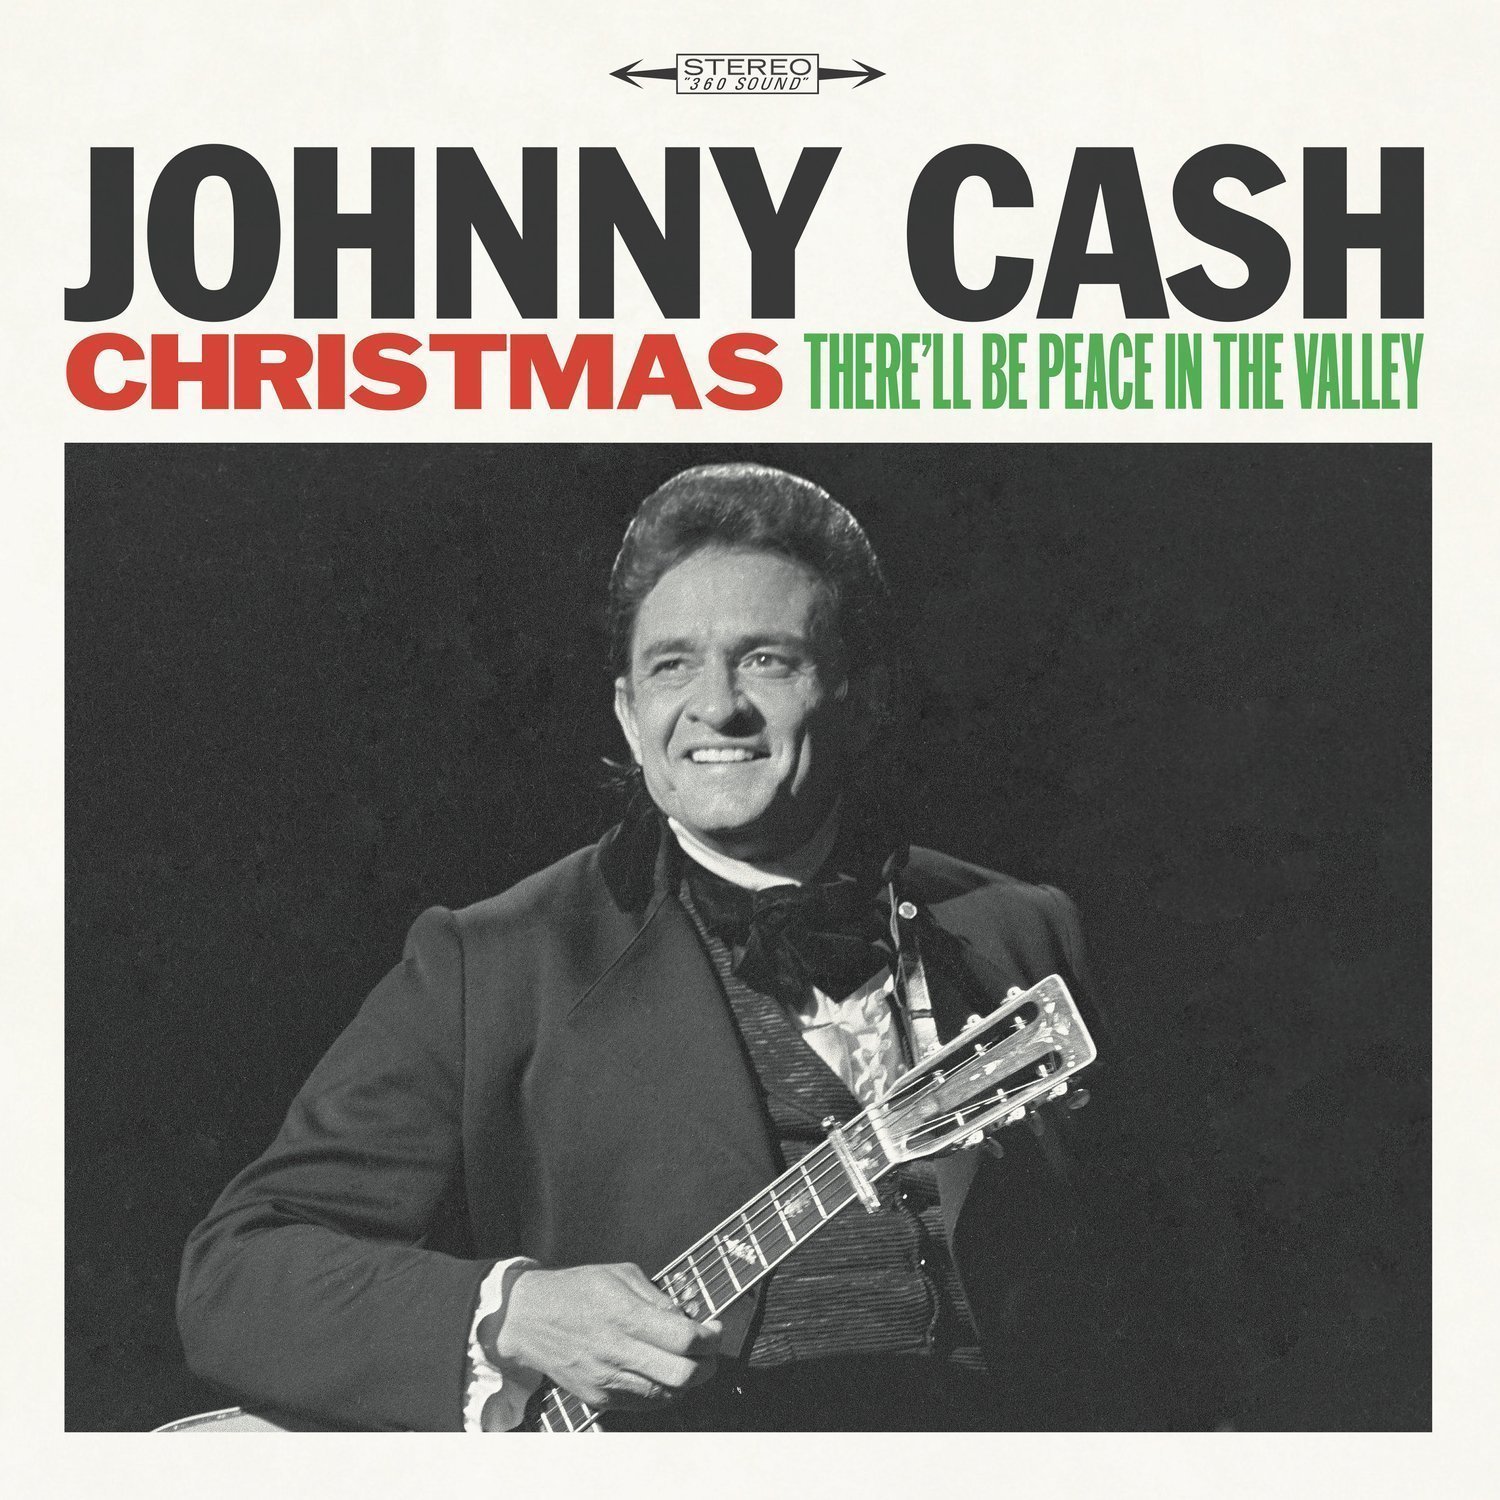 LP deska Johnny Cash Christmas: There'll Be Peace In the Valley (LP)